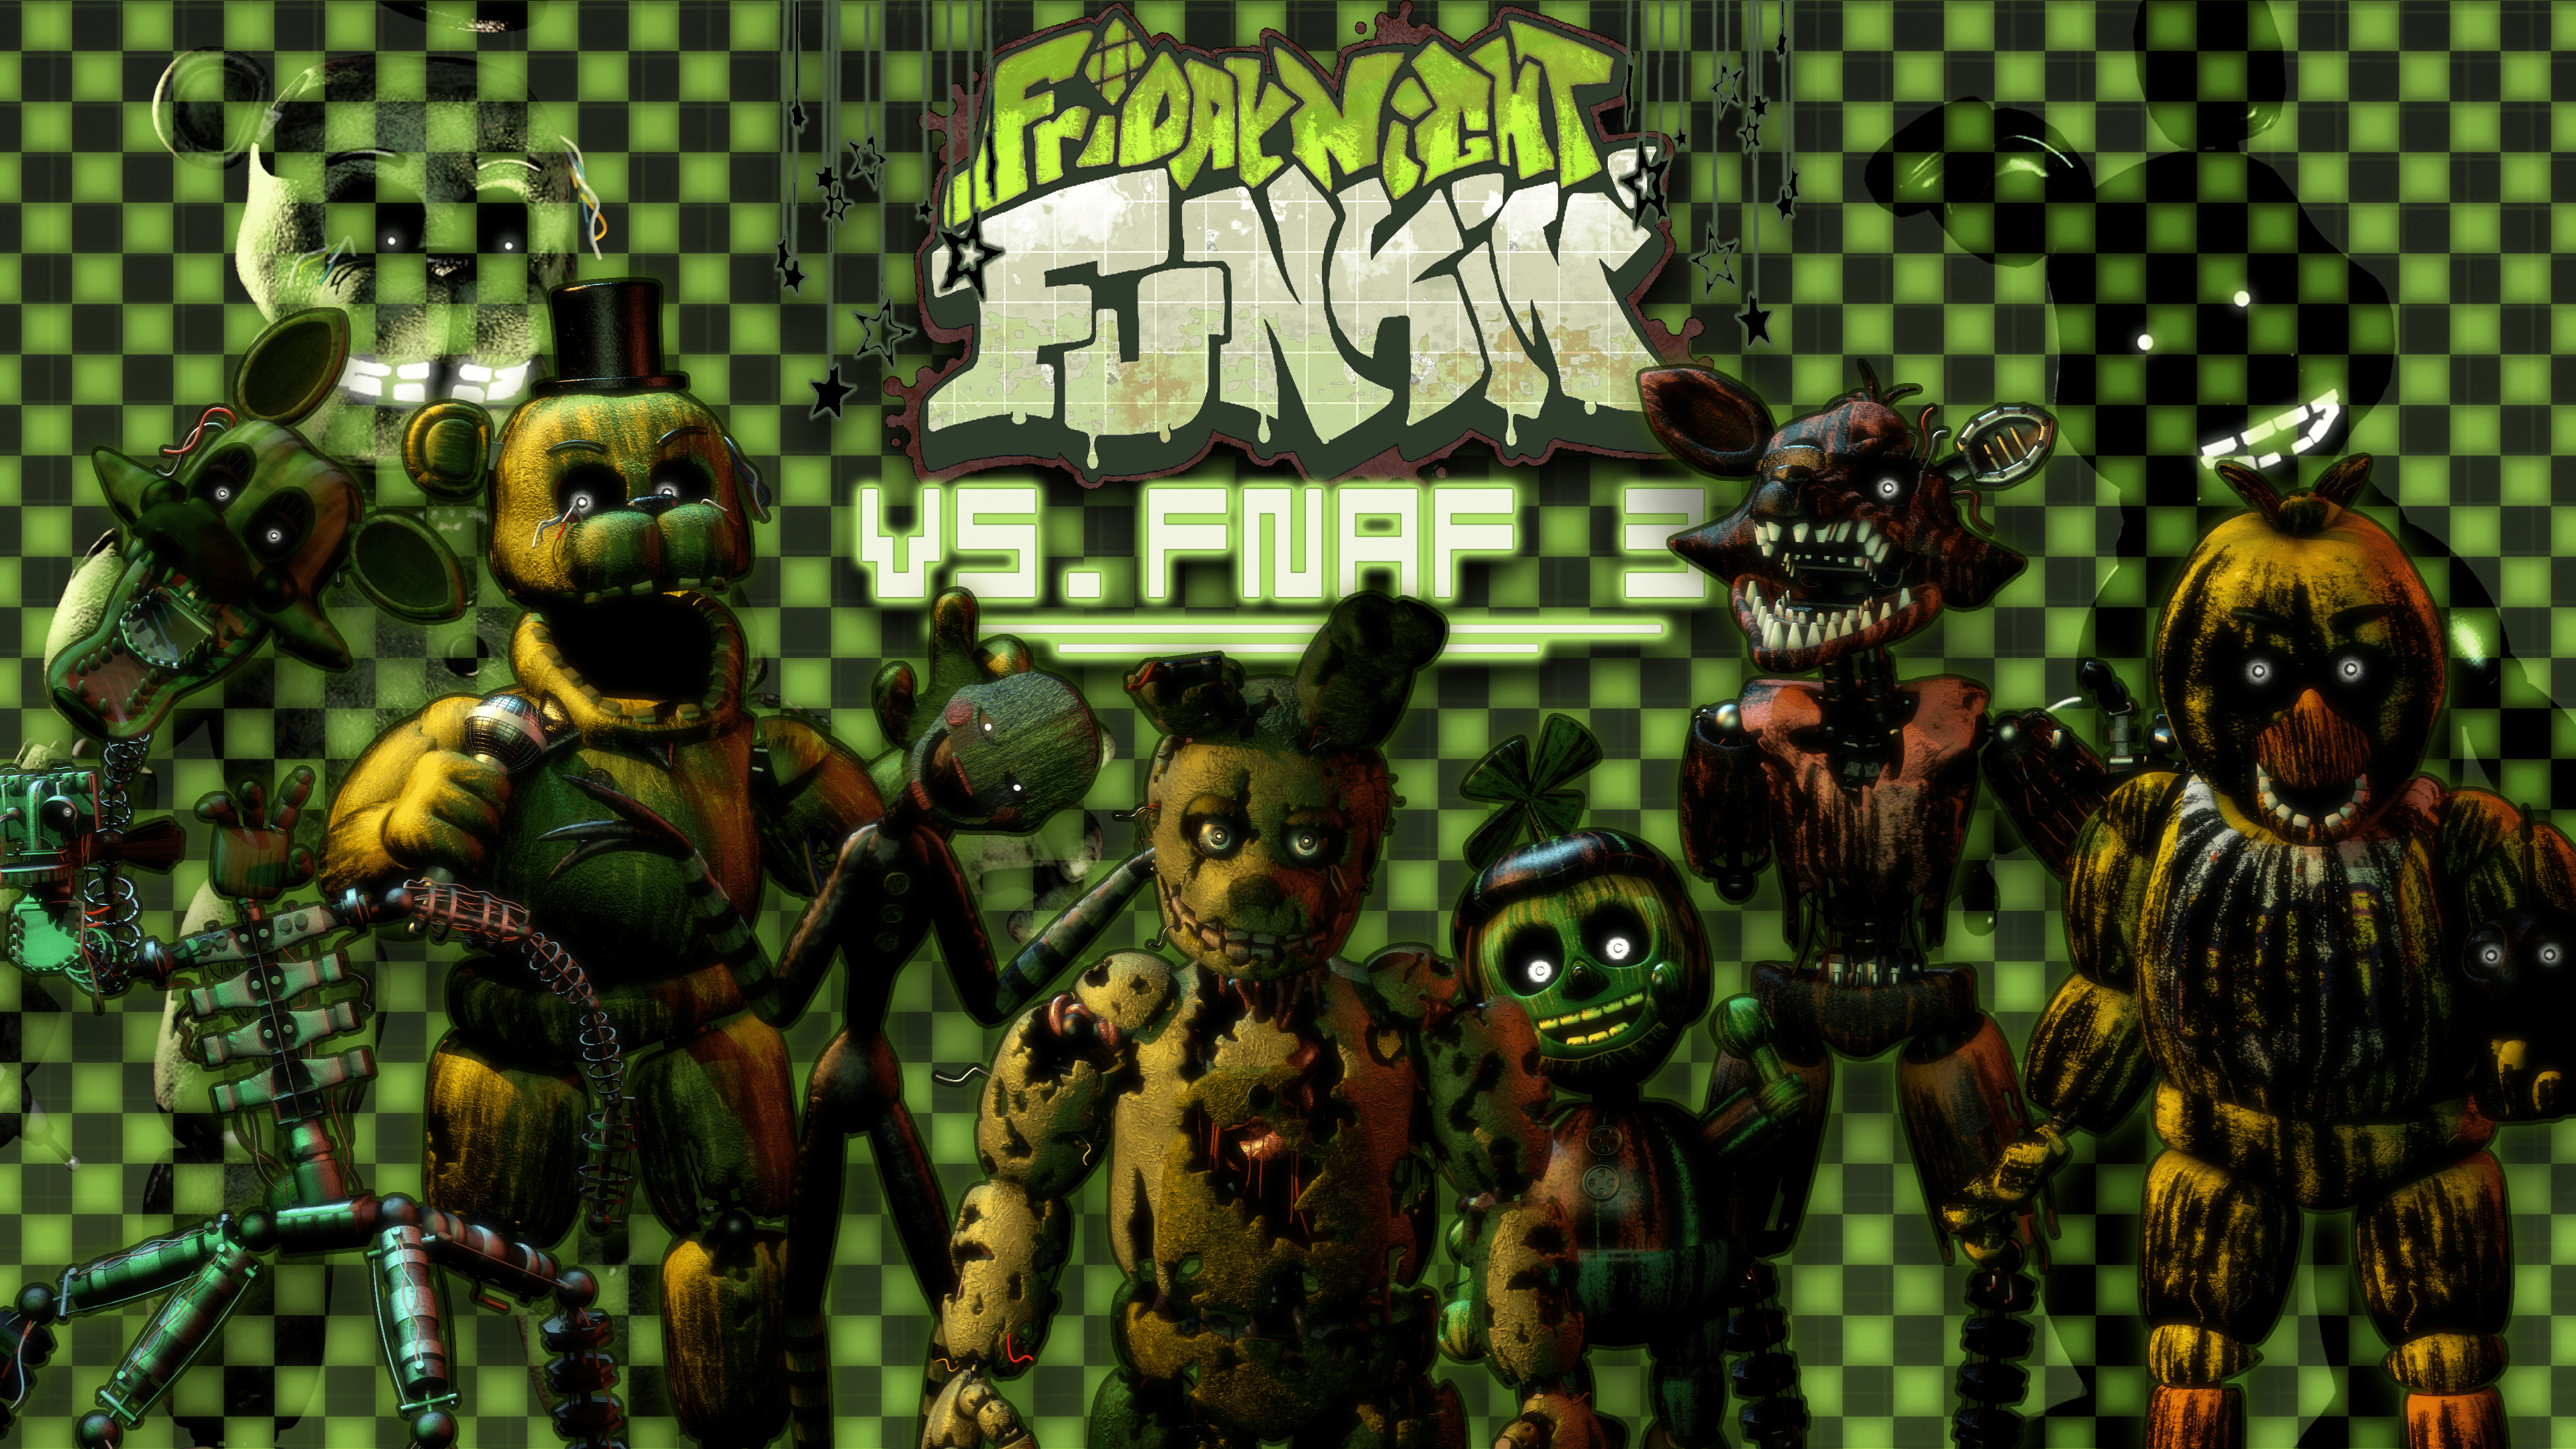 FNF vs Five Nights in Anime 🔥 Jogue online